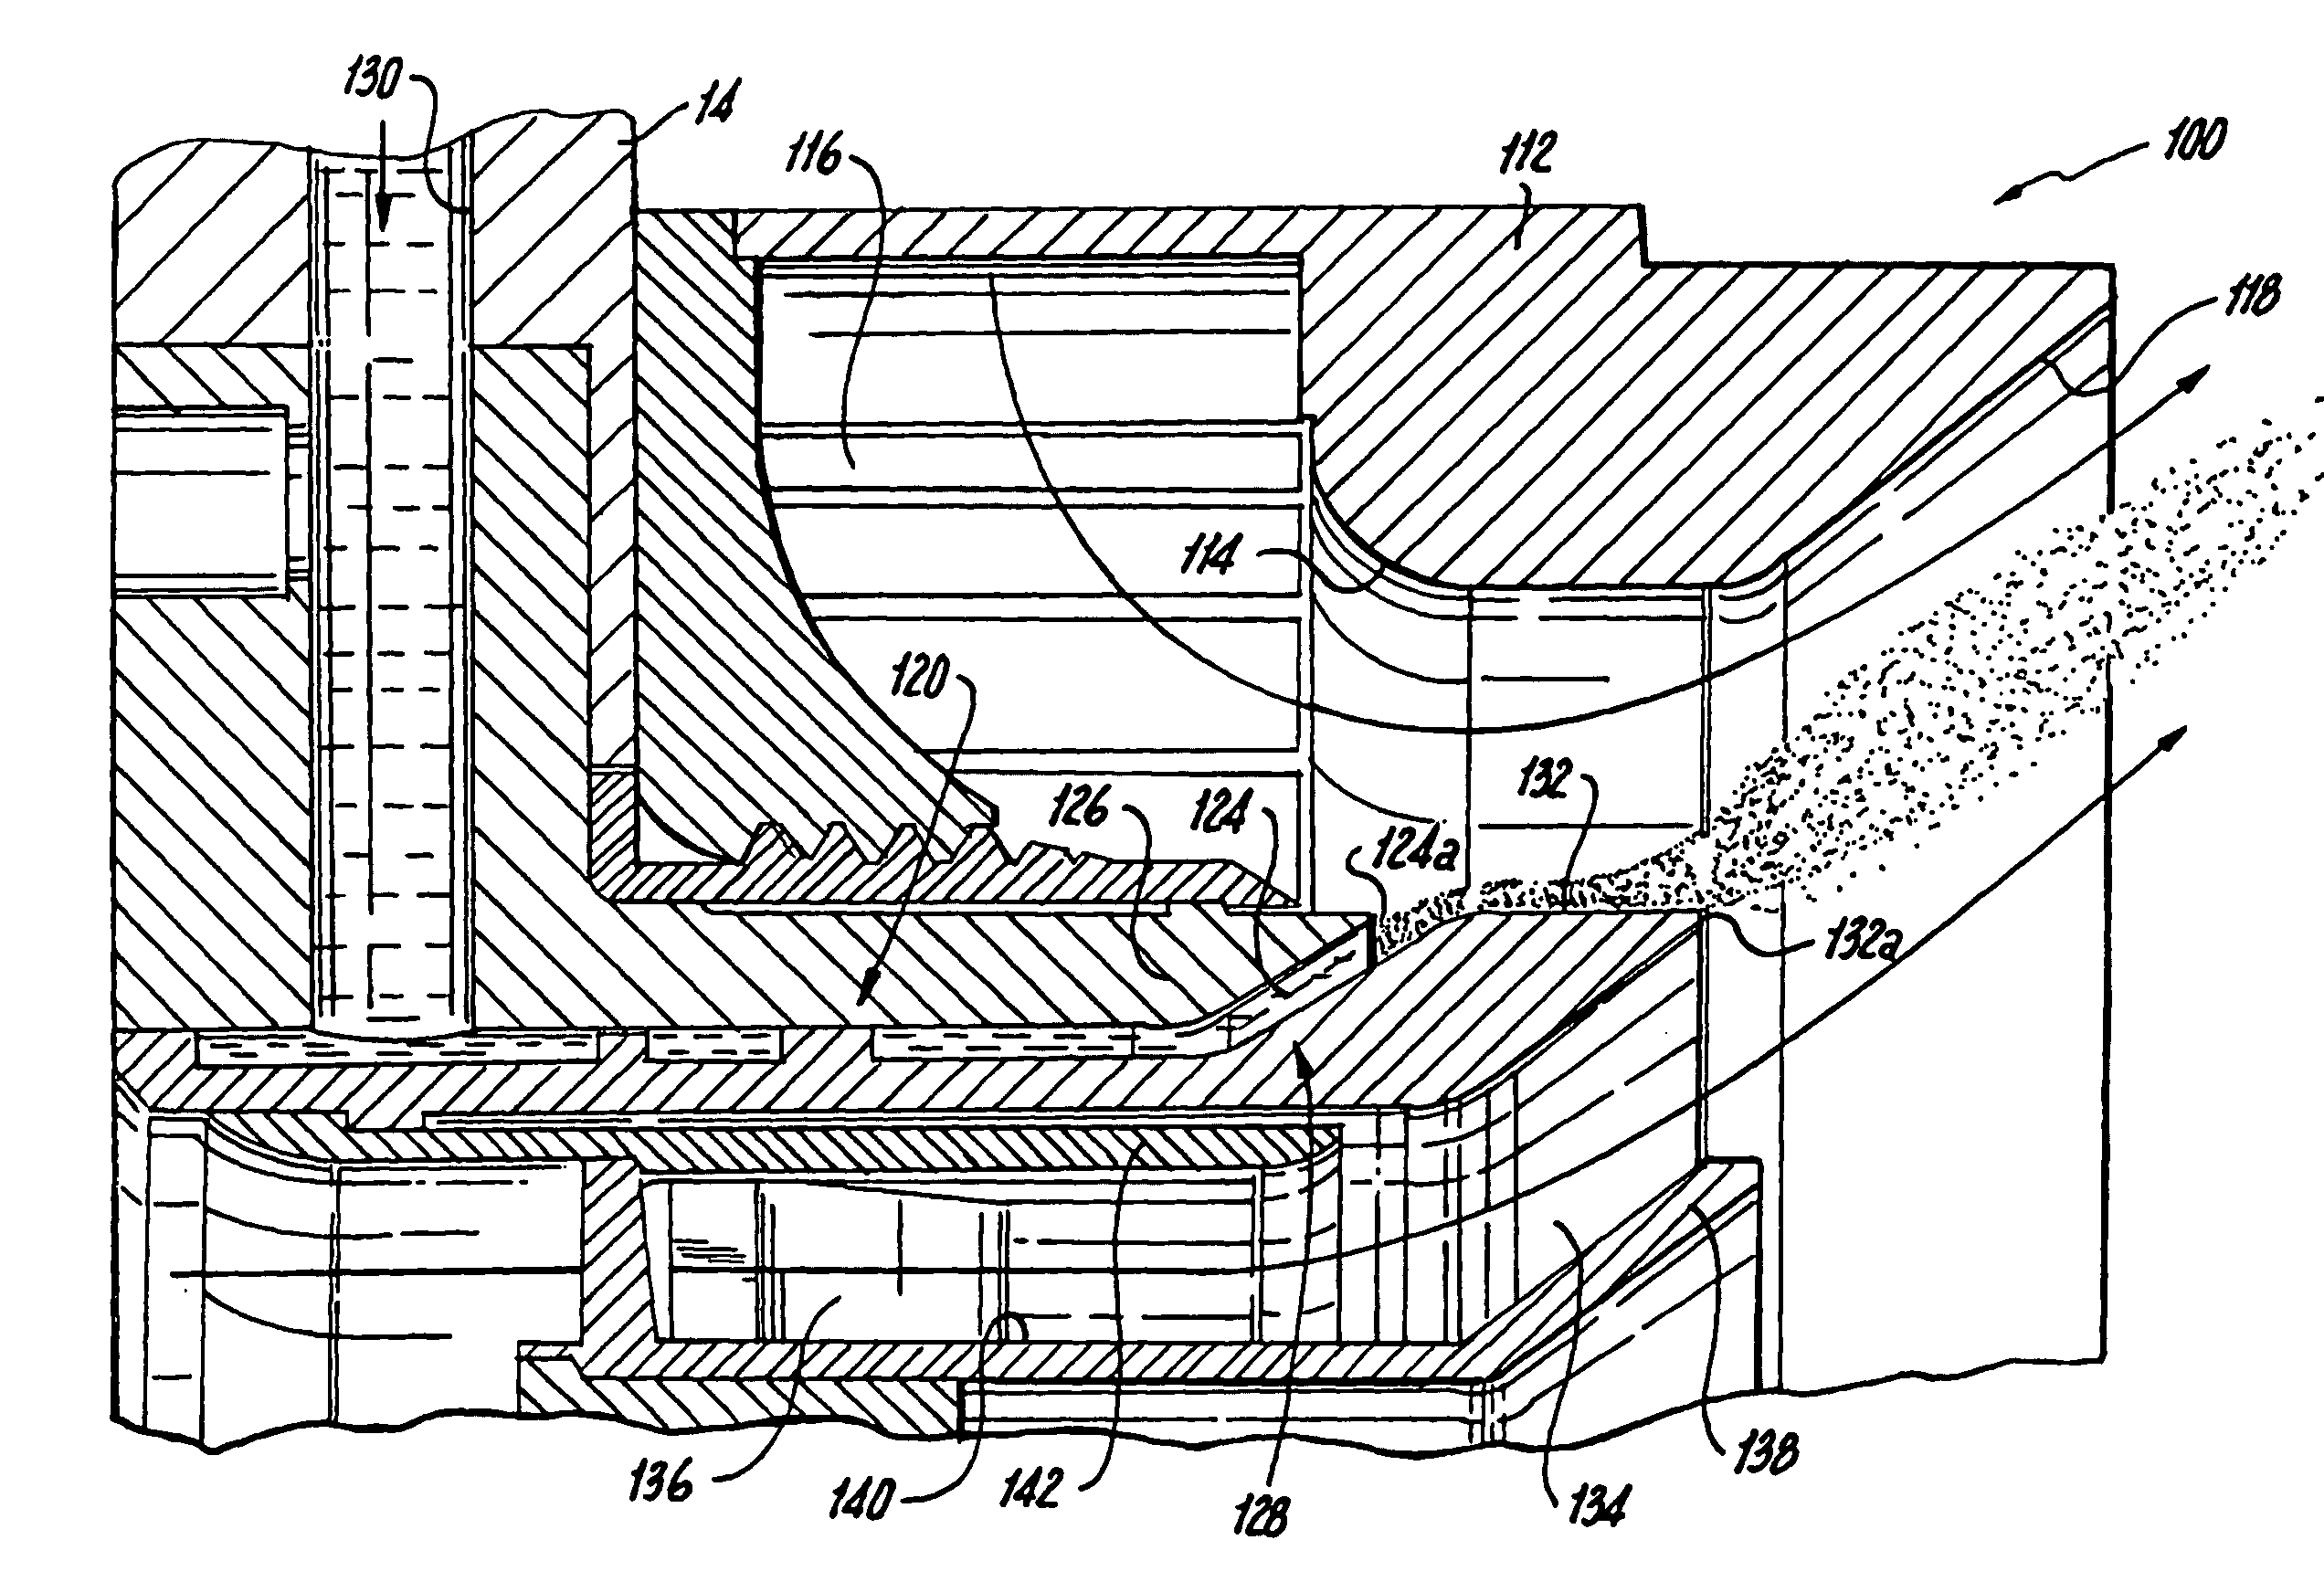 Radially outward flowing air-blast fuel injector for gas turbine engine